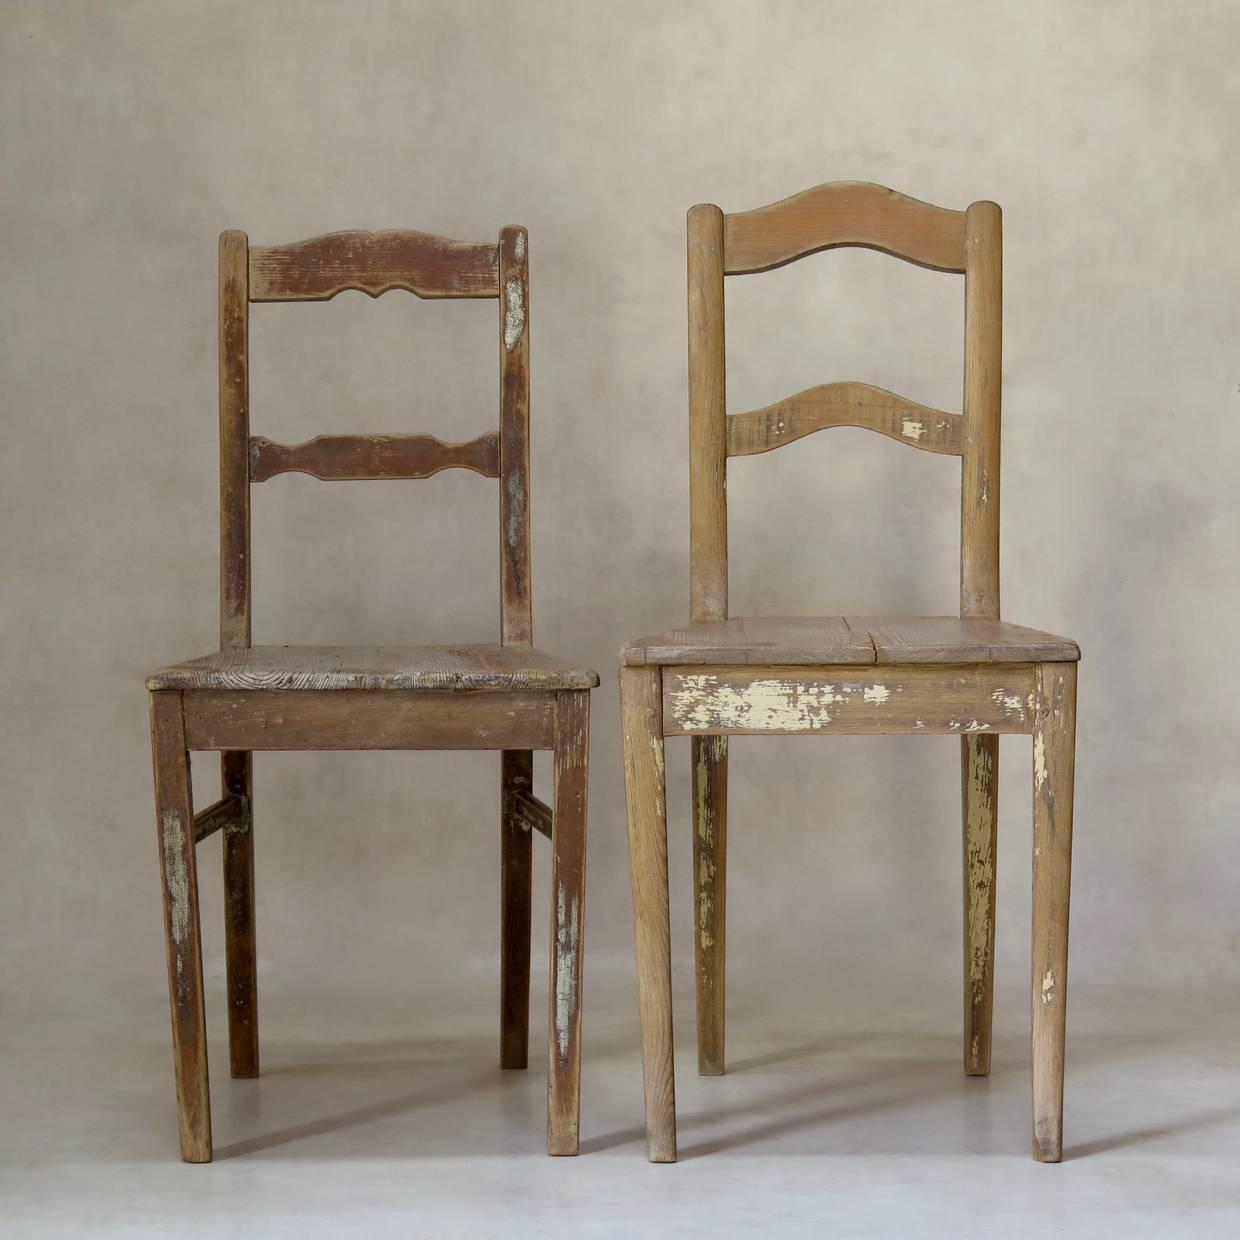 Charming near-pair of rustic pine chairs, retaining traces of paint here and there. Large trapezoidal seats. Raised on sabre legs.
Priced individually.